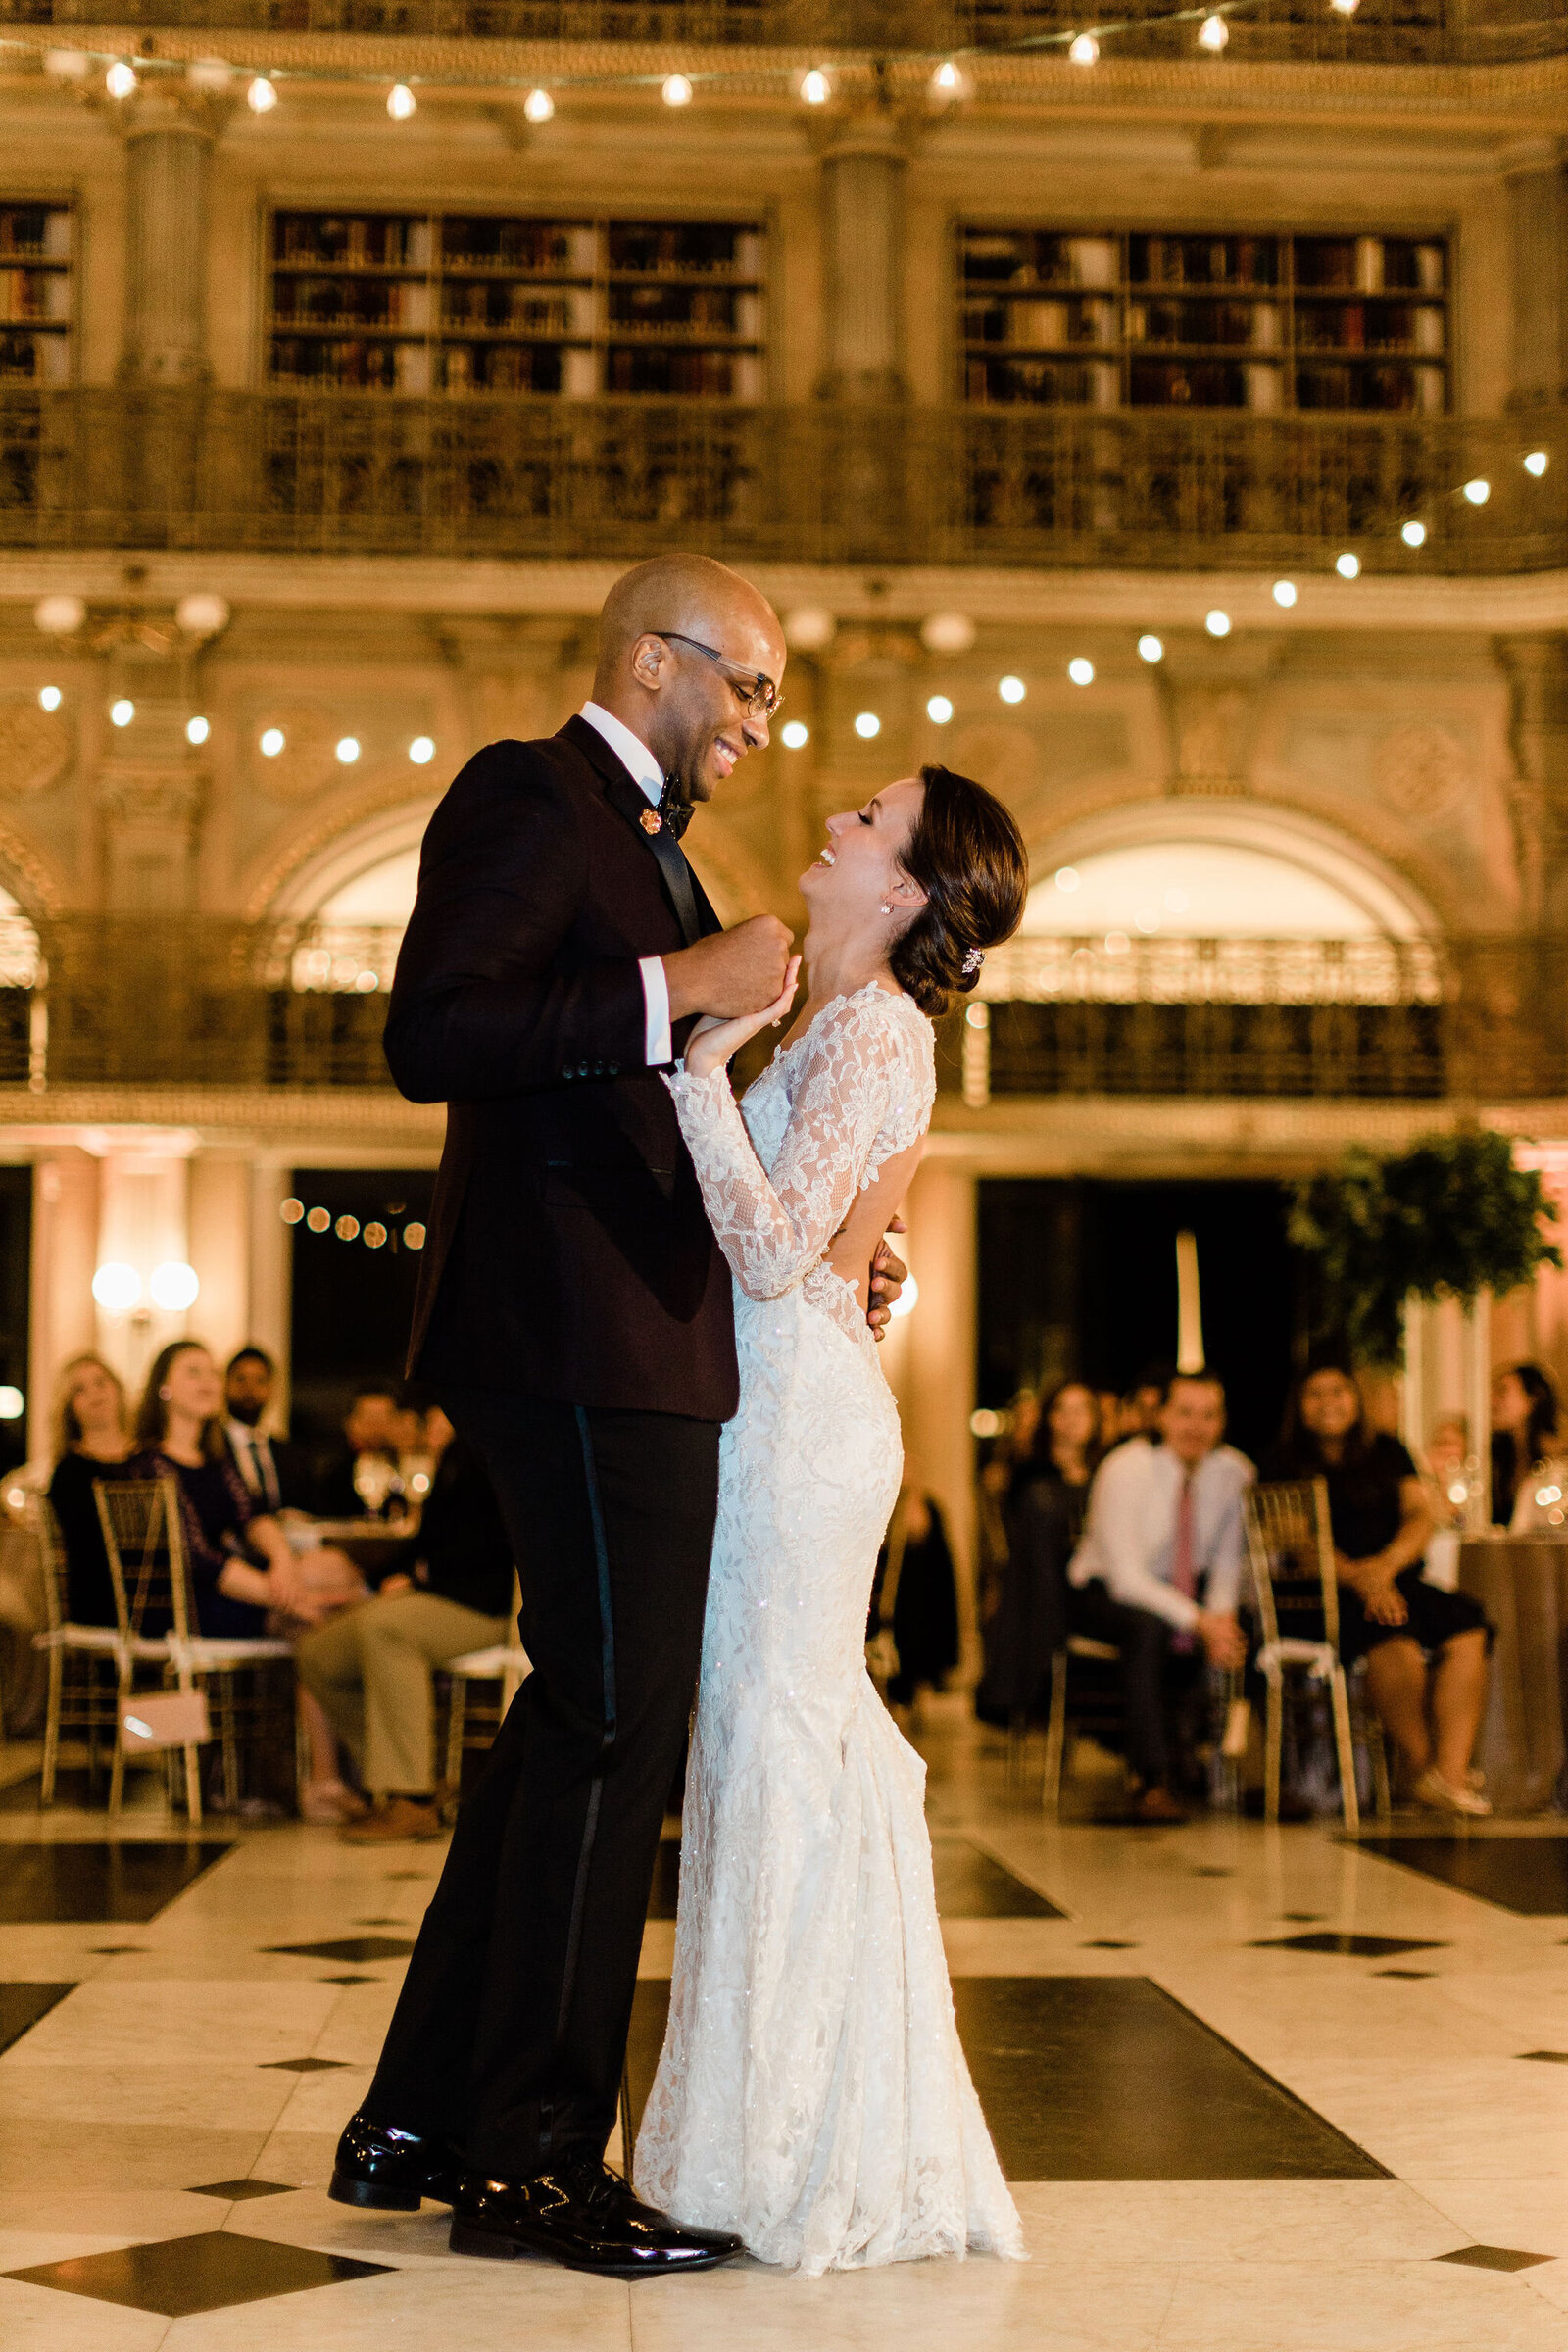 First Dance Photo  | The Peabody Library Baltimore MD | The Axtells Photo and Film